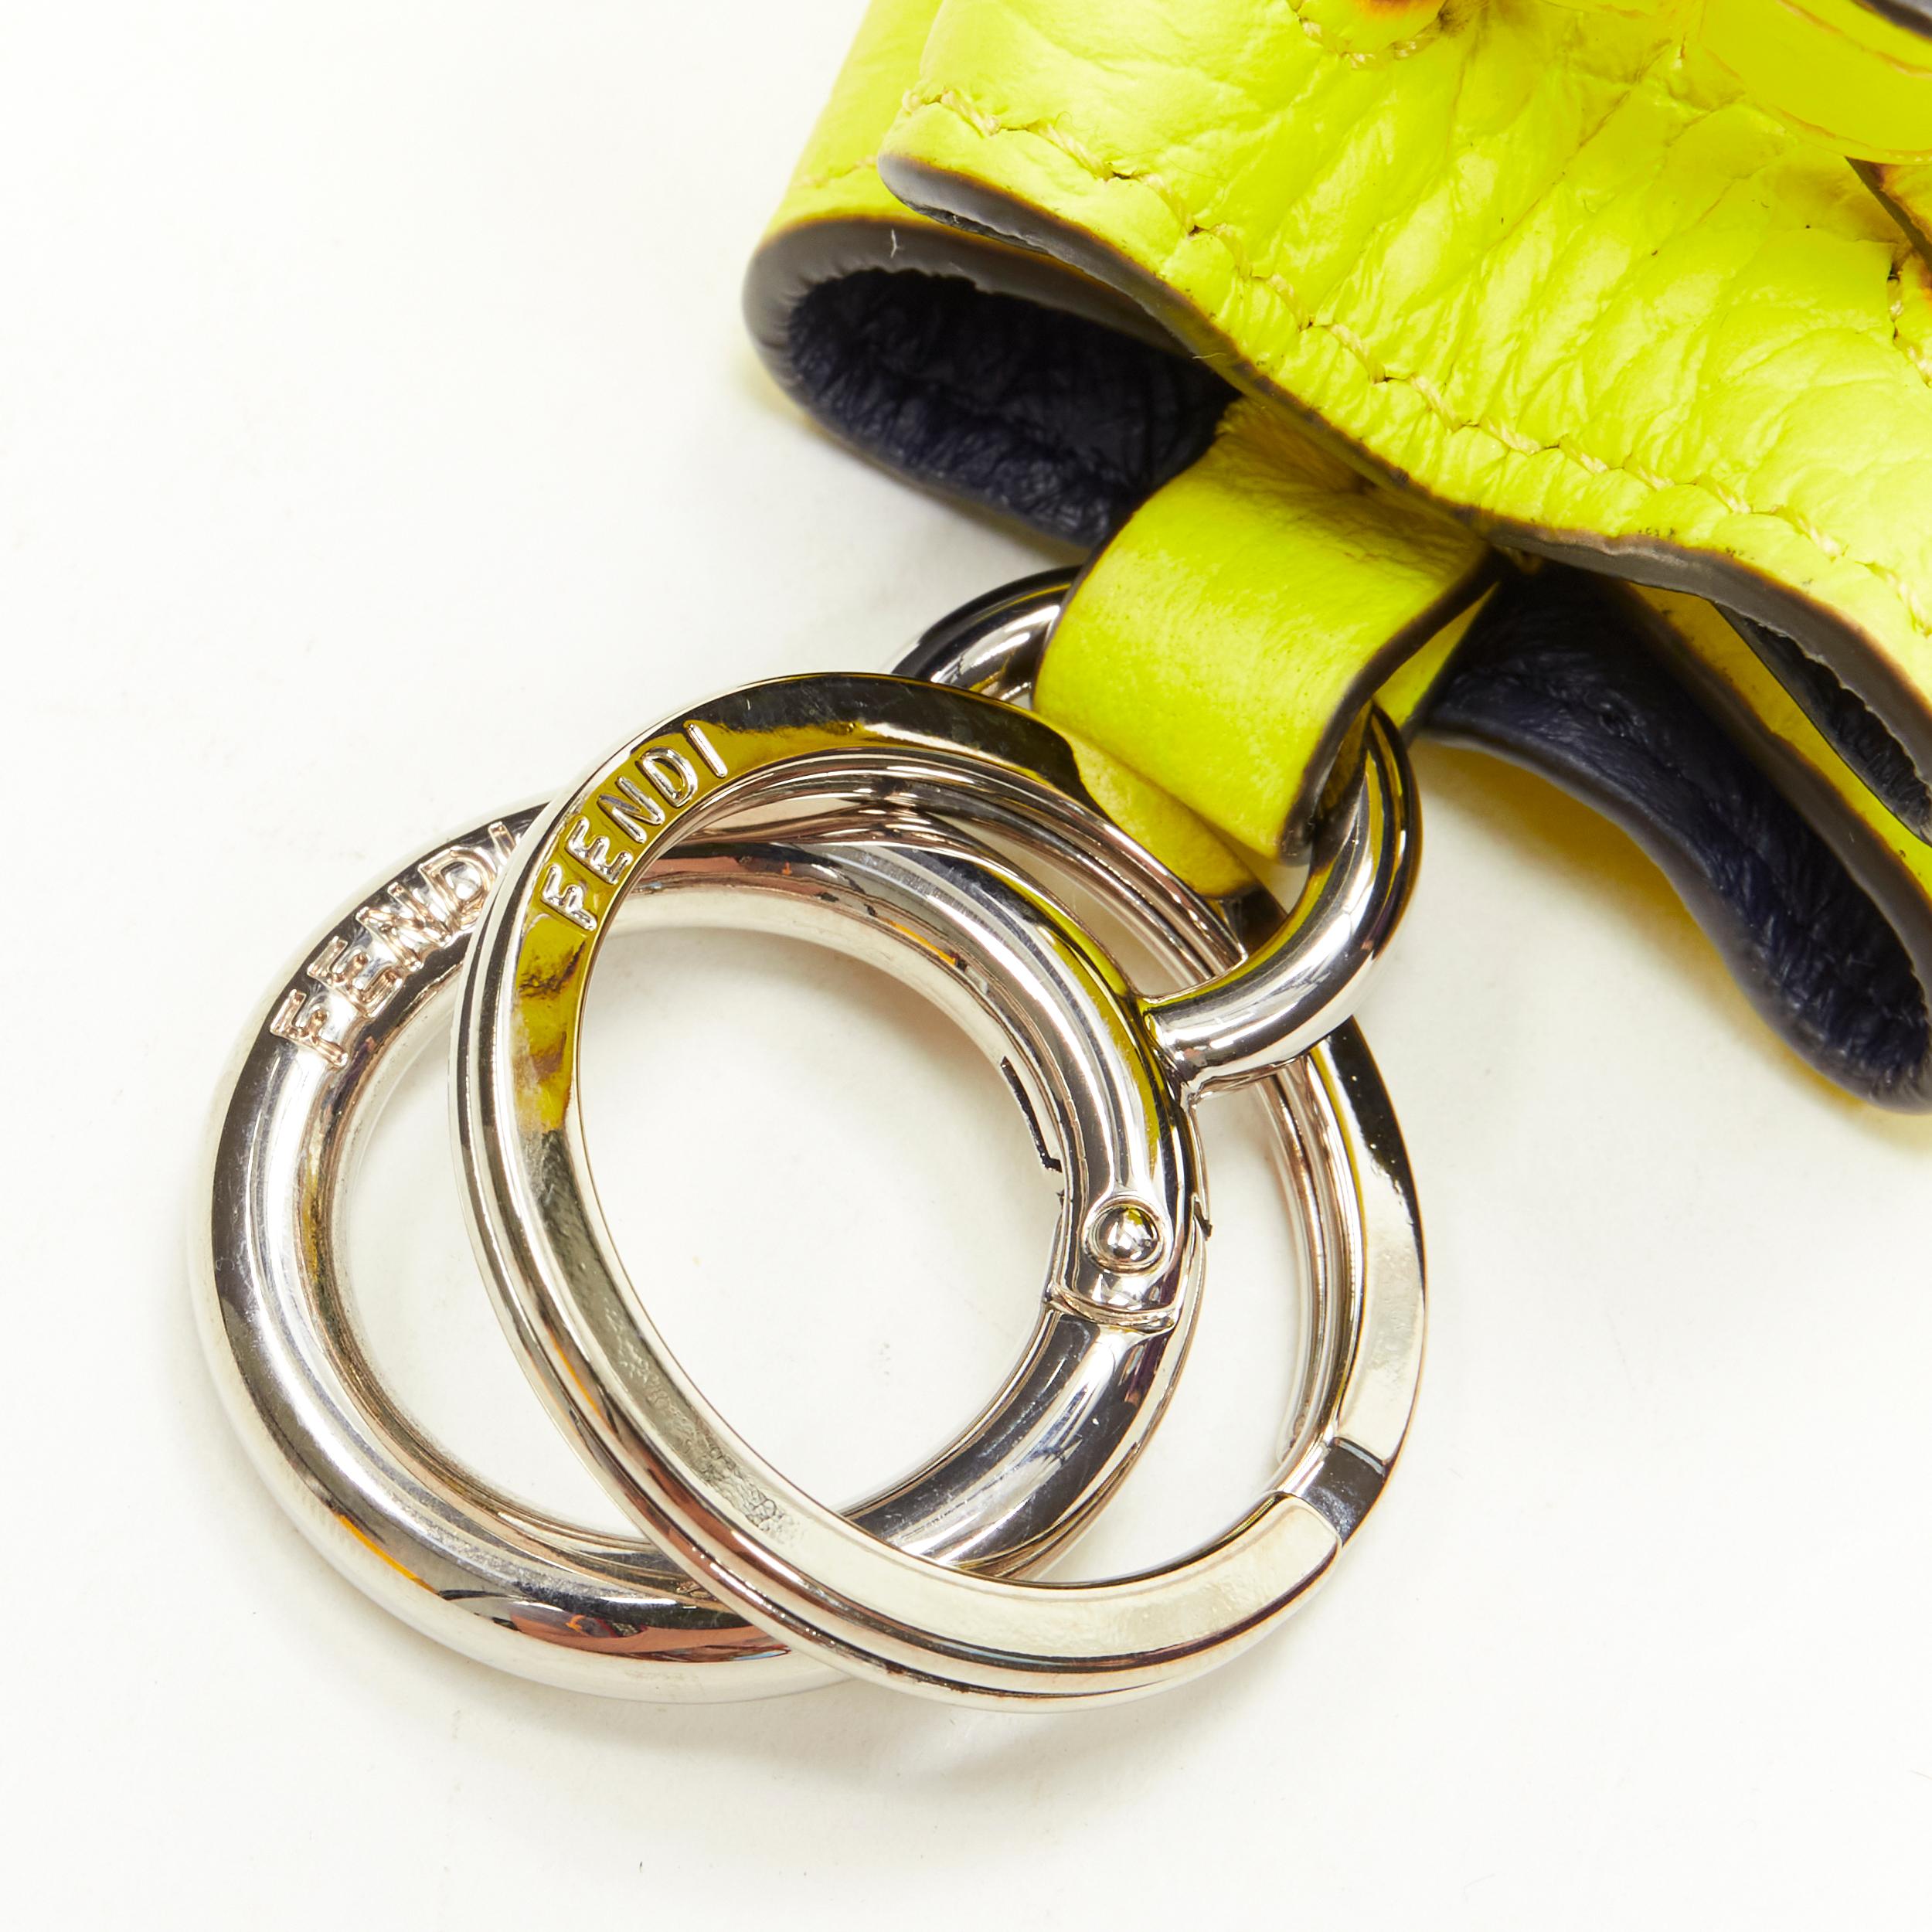 FENDI Mon Tresor Micro Bucket drawstring bright yellow leather bag charm In Good Condition For Sale In Hong Kong, NT